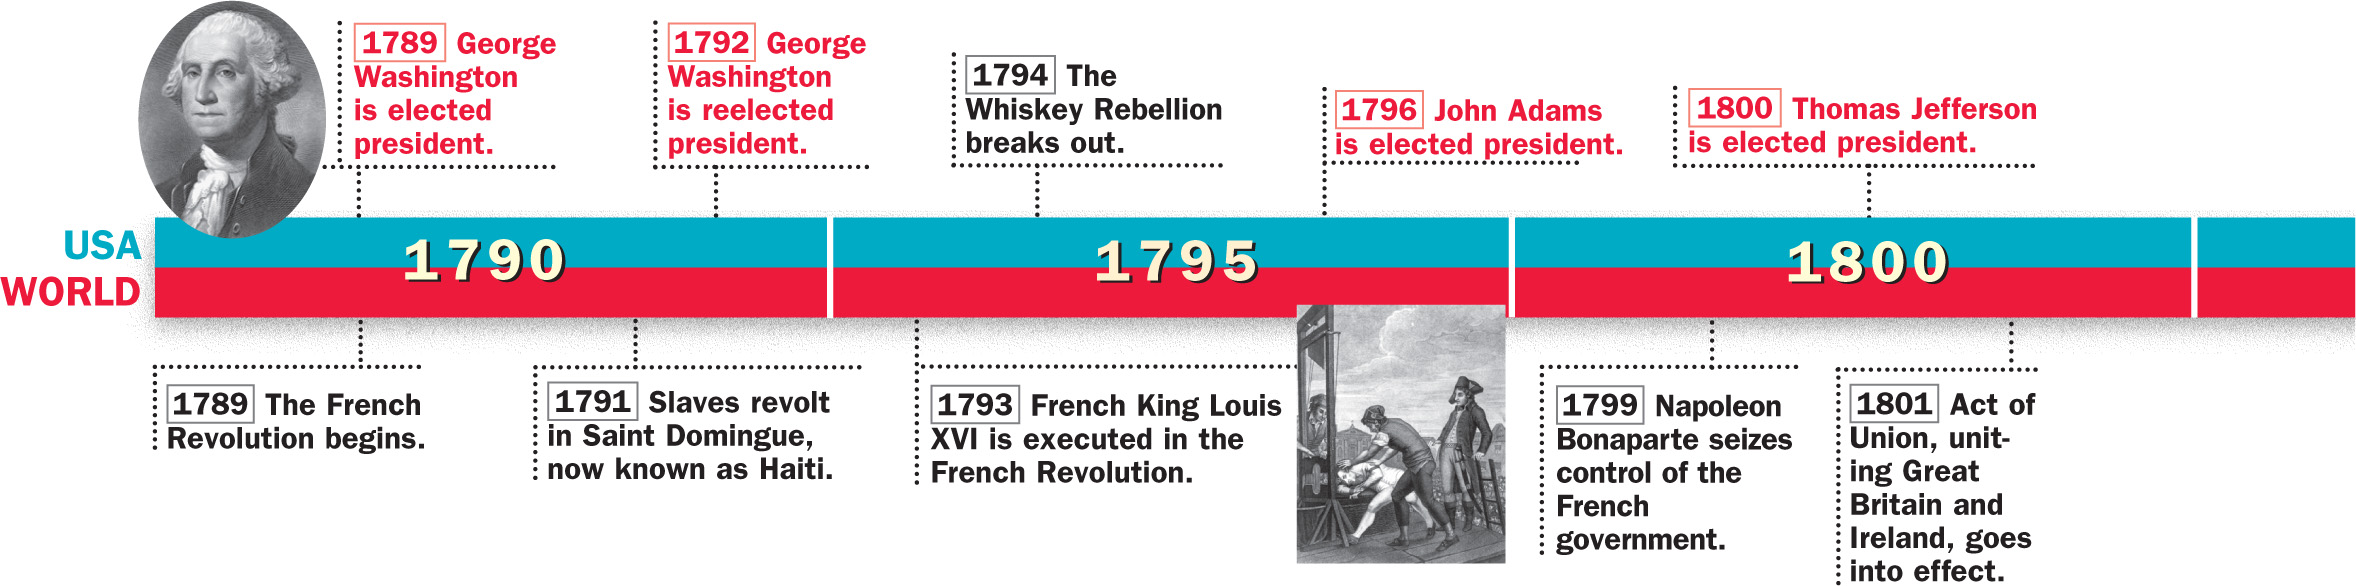 A timeline of historical events from 1789 to 1816 in both
the U.S. and the world